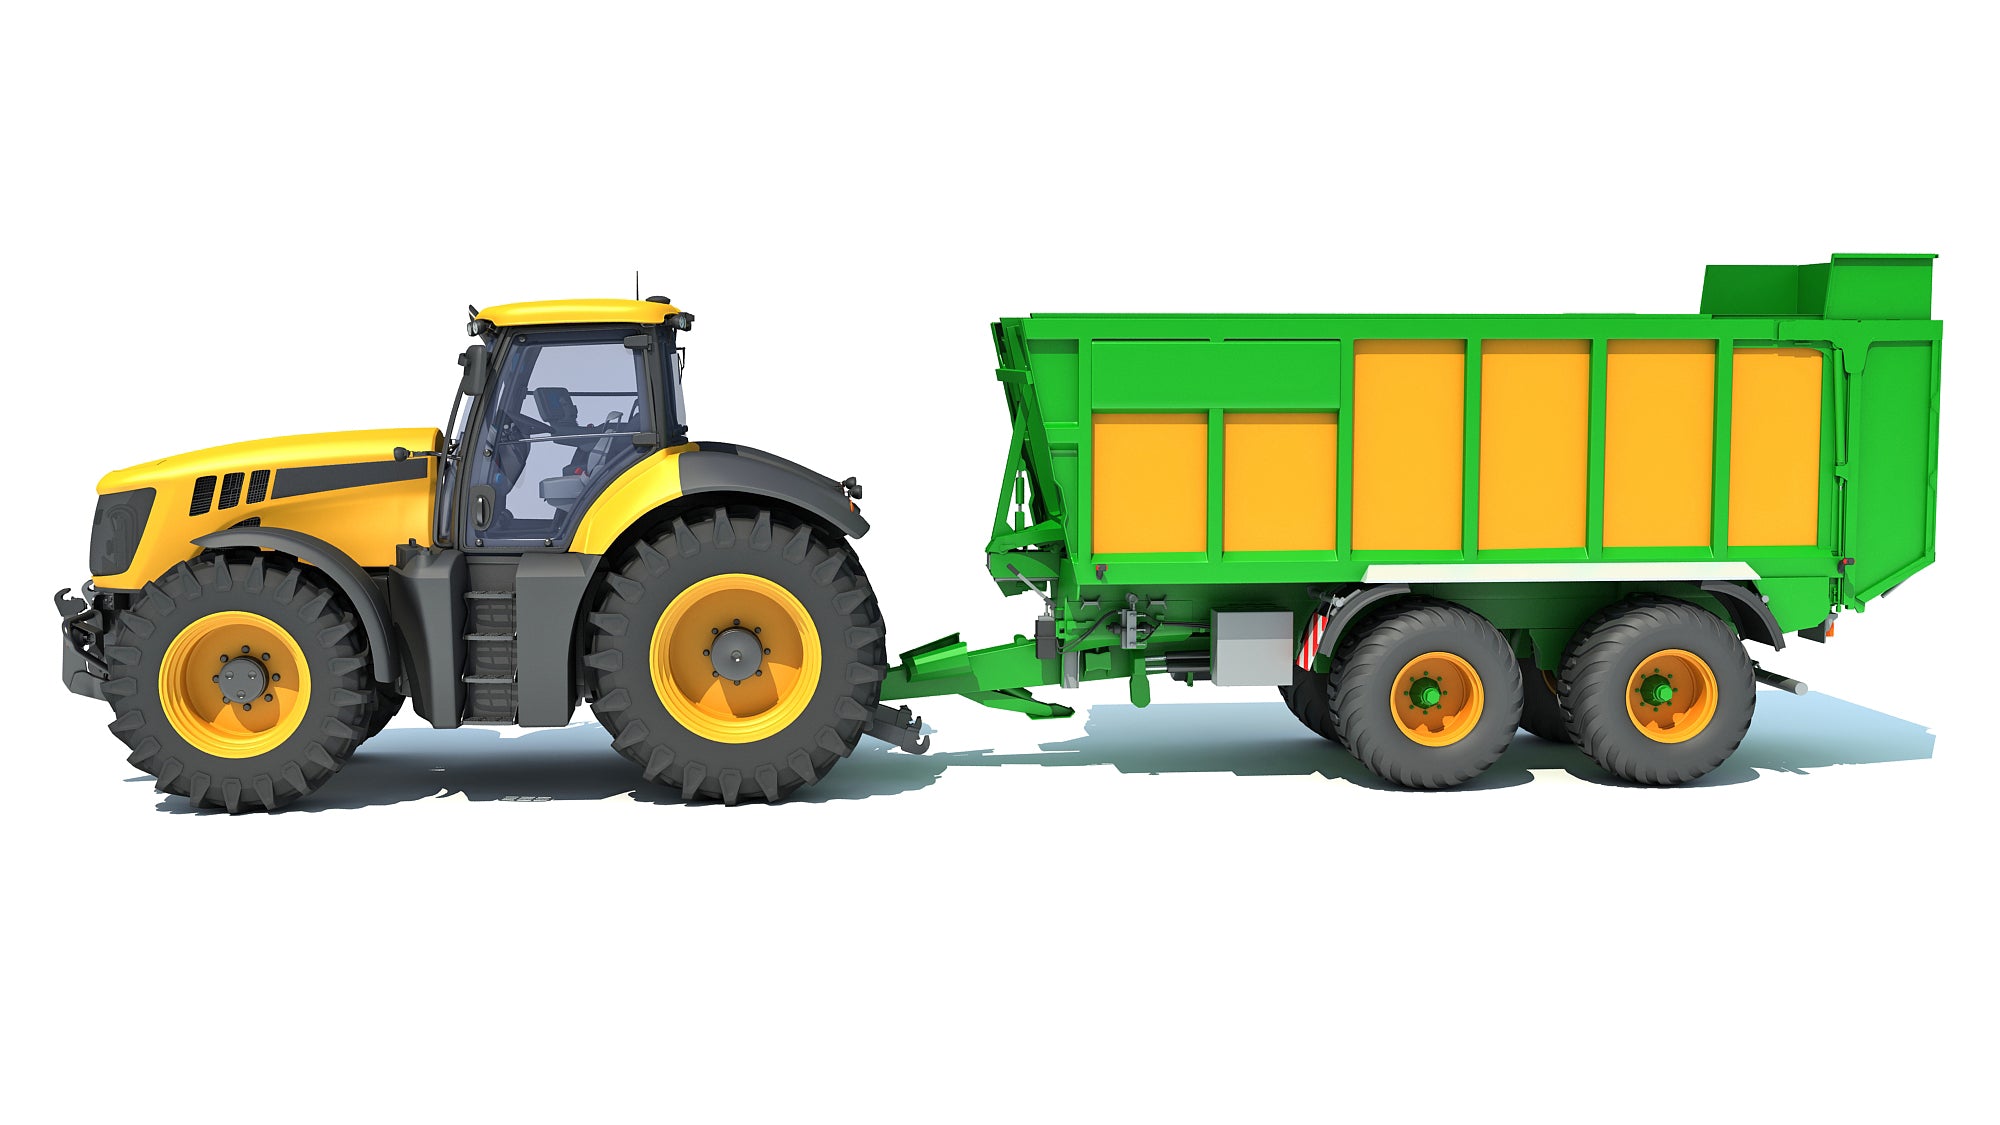 Farm Tractor with Trailer